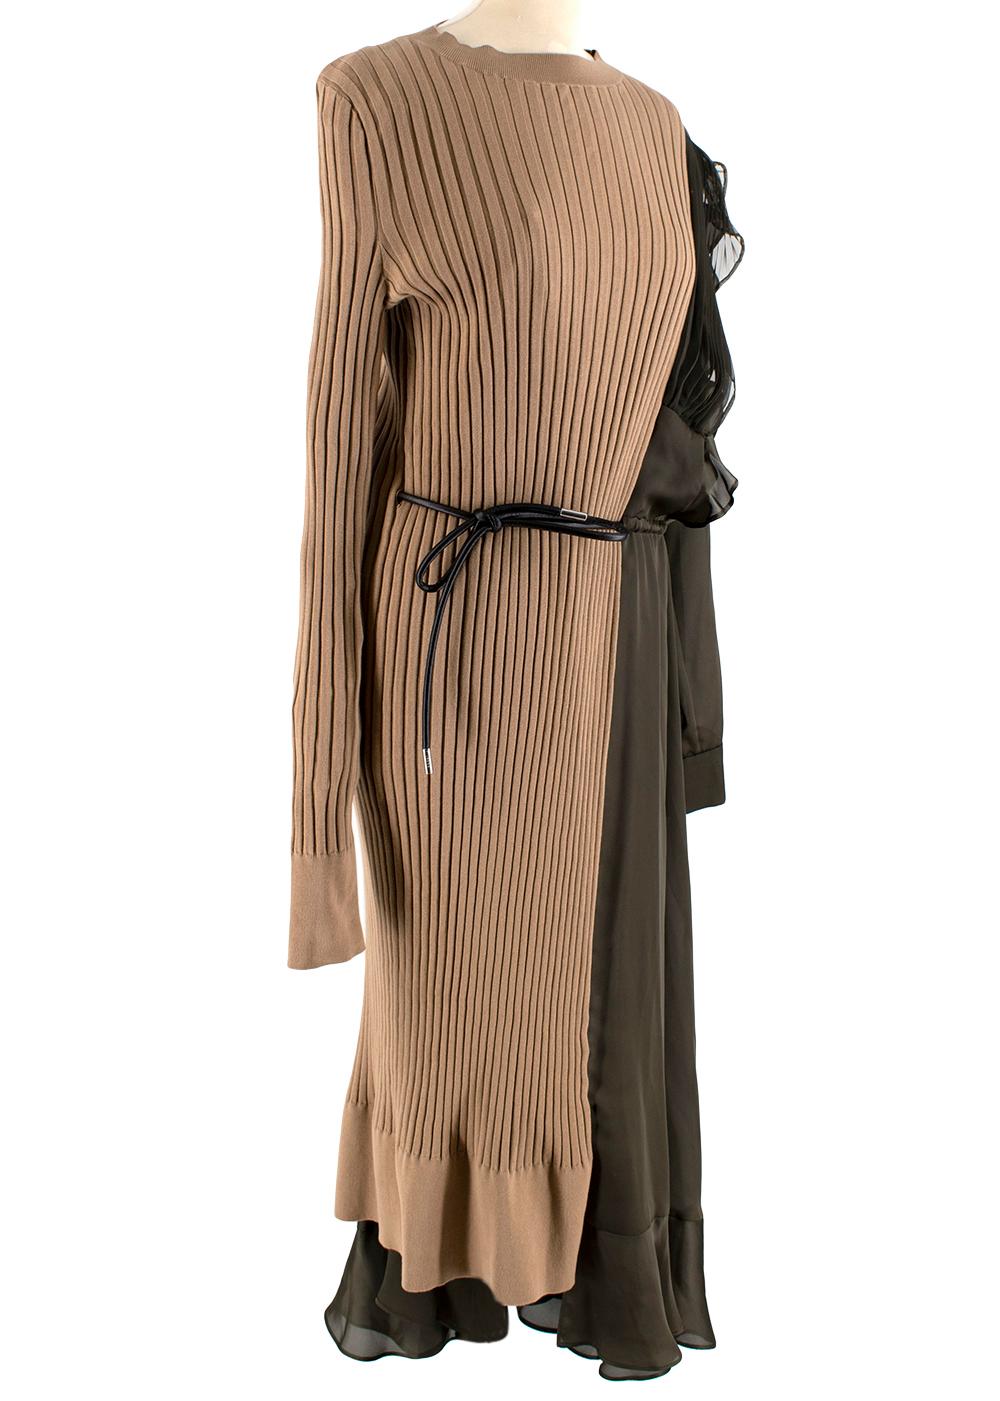 Sacai Paneled Asymmetric Cotton, Satin And Tulle Midi Dress In Green

- Beige and khaki-green cotton-blend dress
- Ribbed knit and satin dual-texture
- Asymmetric silhouette 
- Round neckline 
- Ruffle trimming 
- Synthetic leather drawstring waist